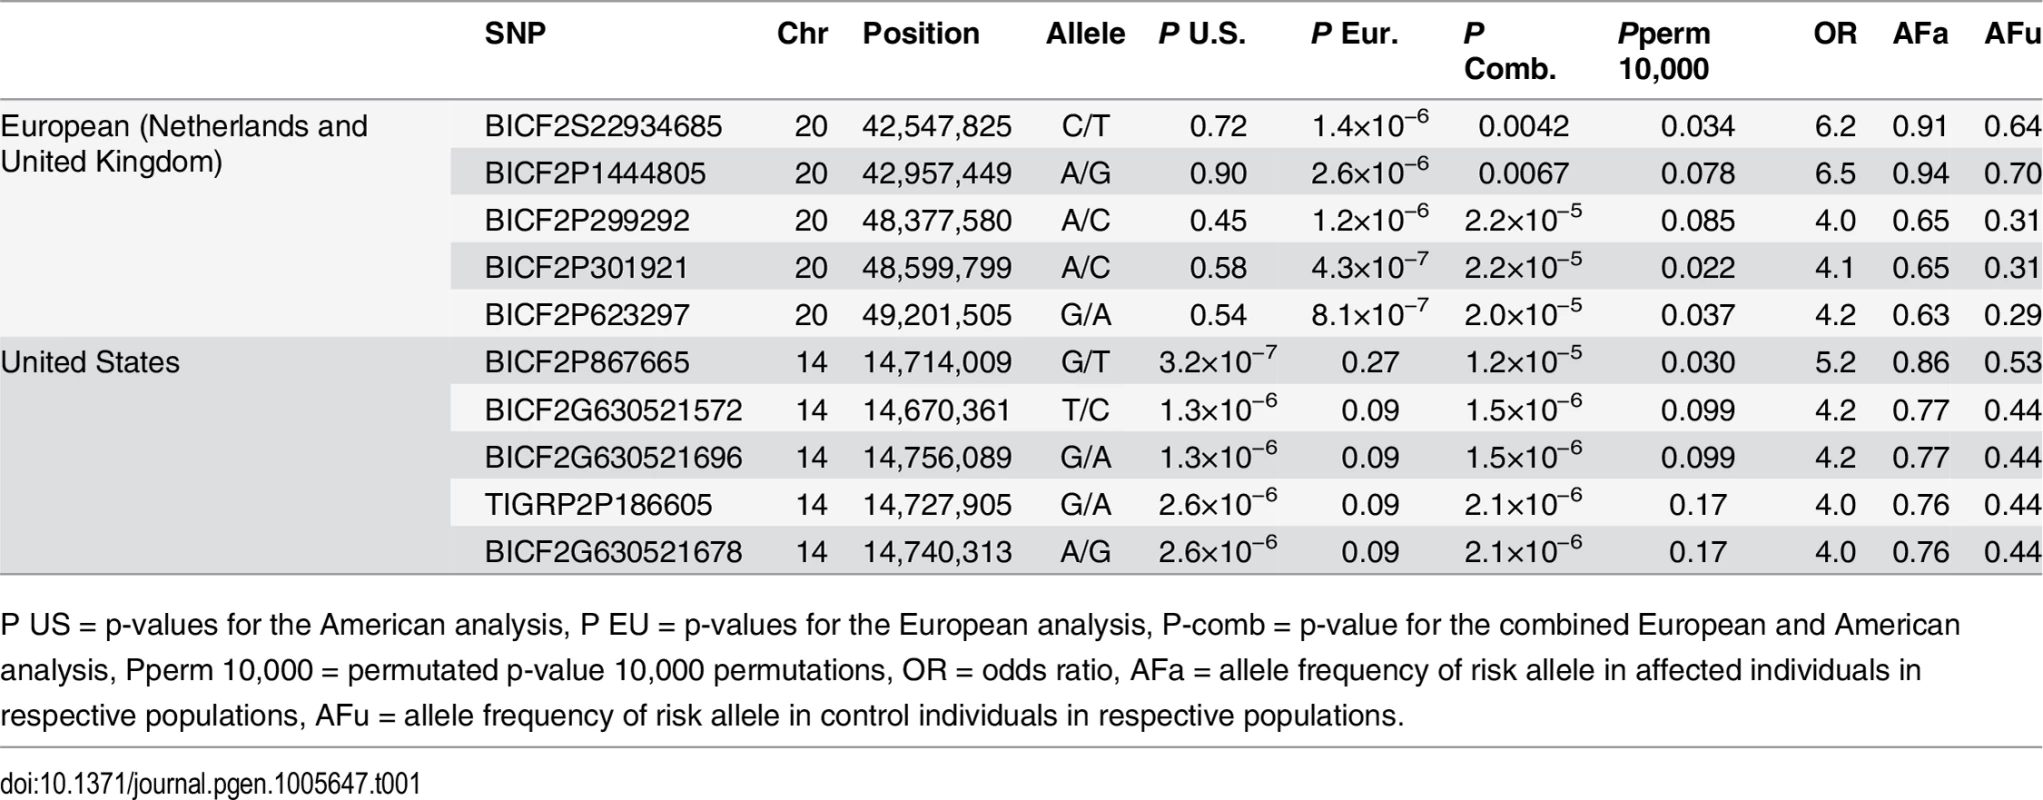 Top-ranking GWAS SNPs from European and United States data.